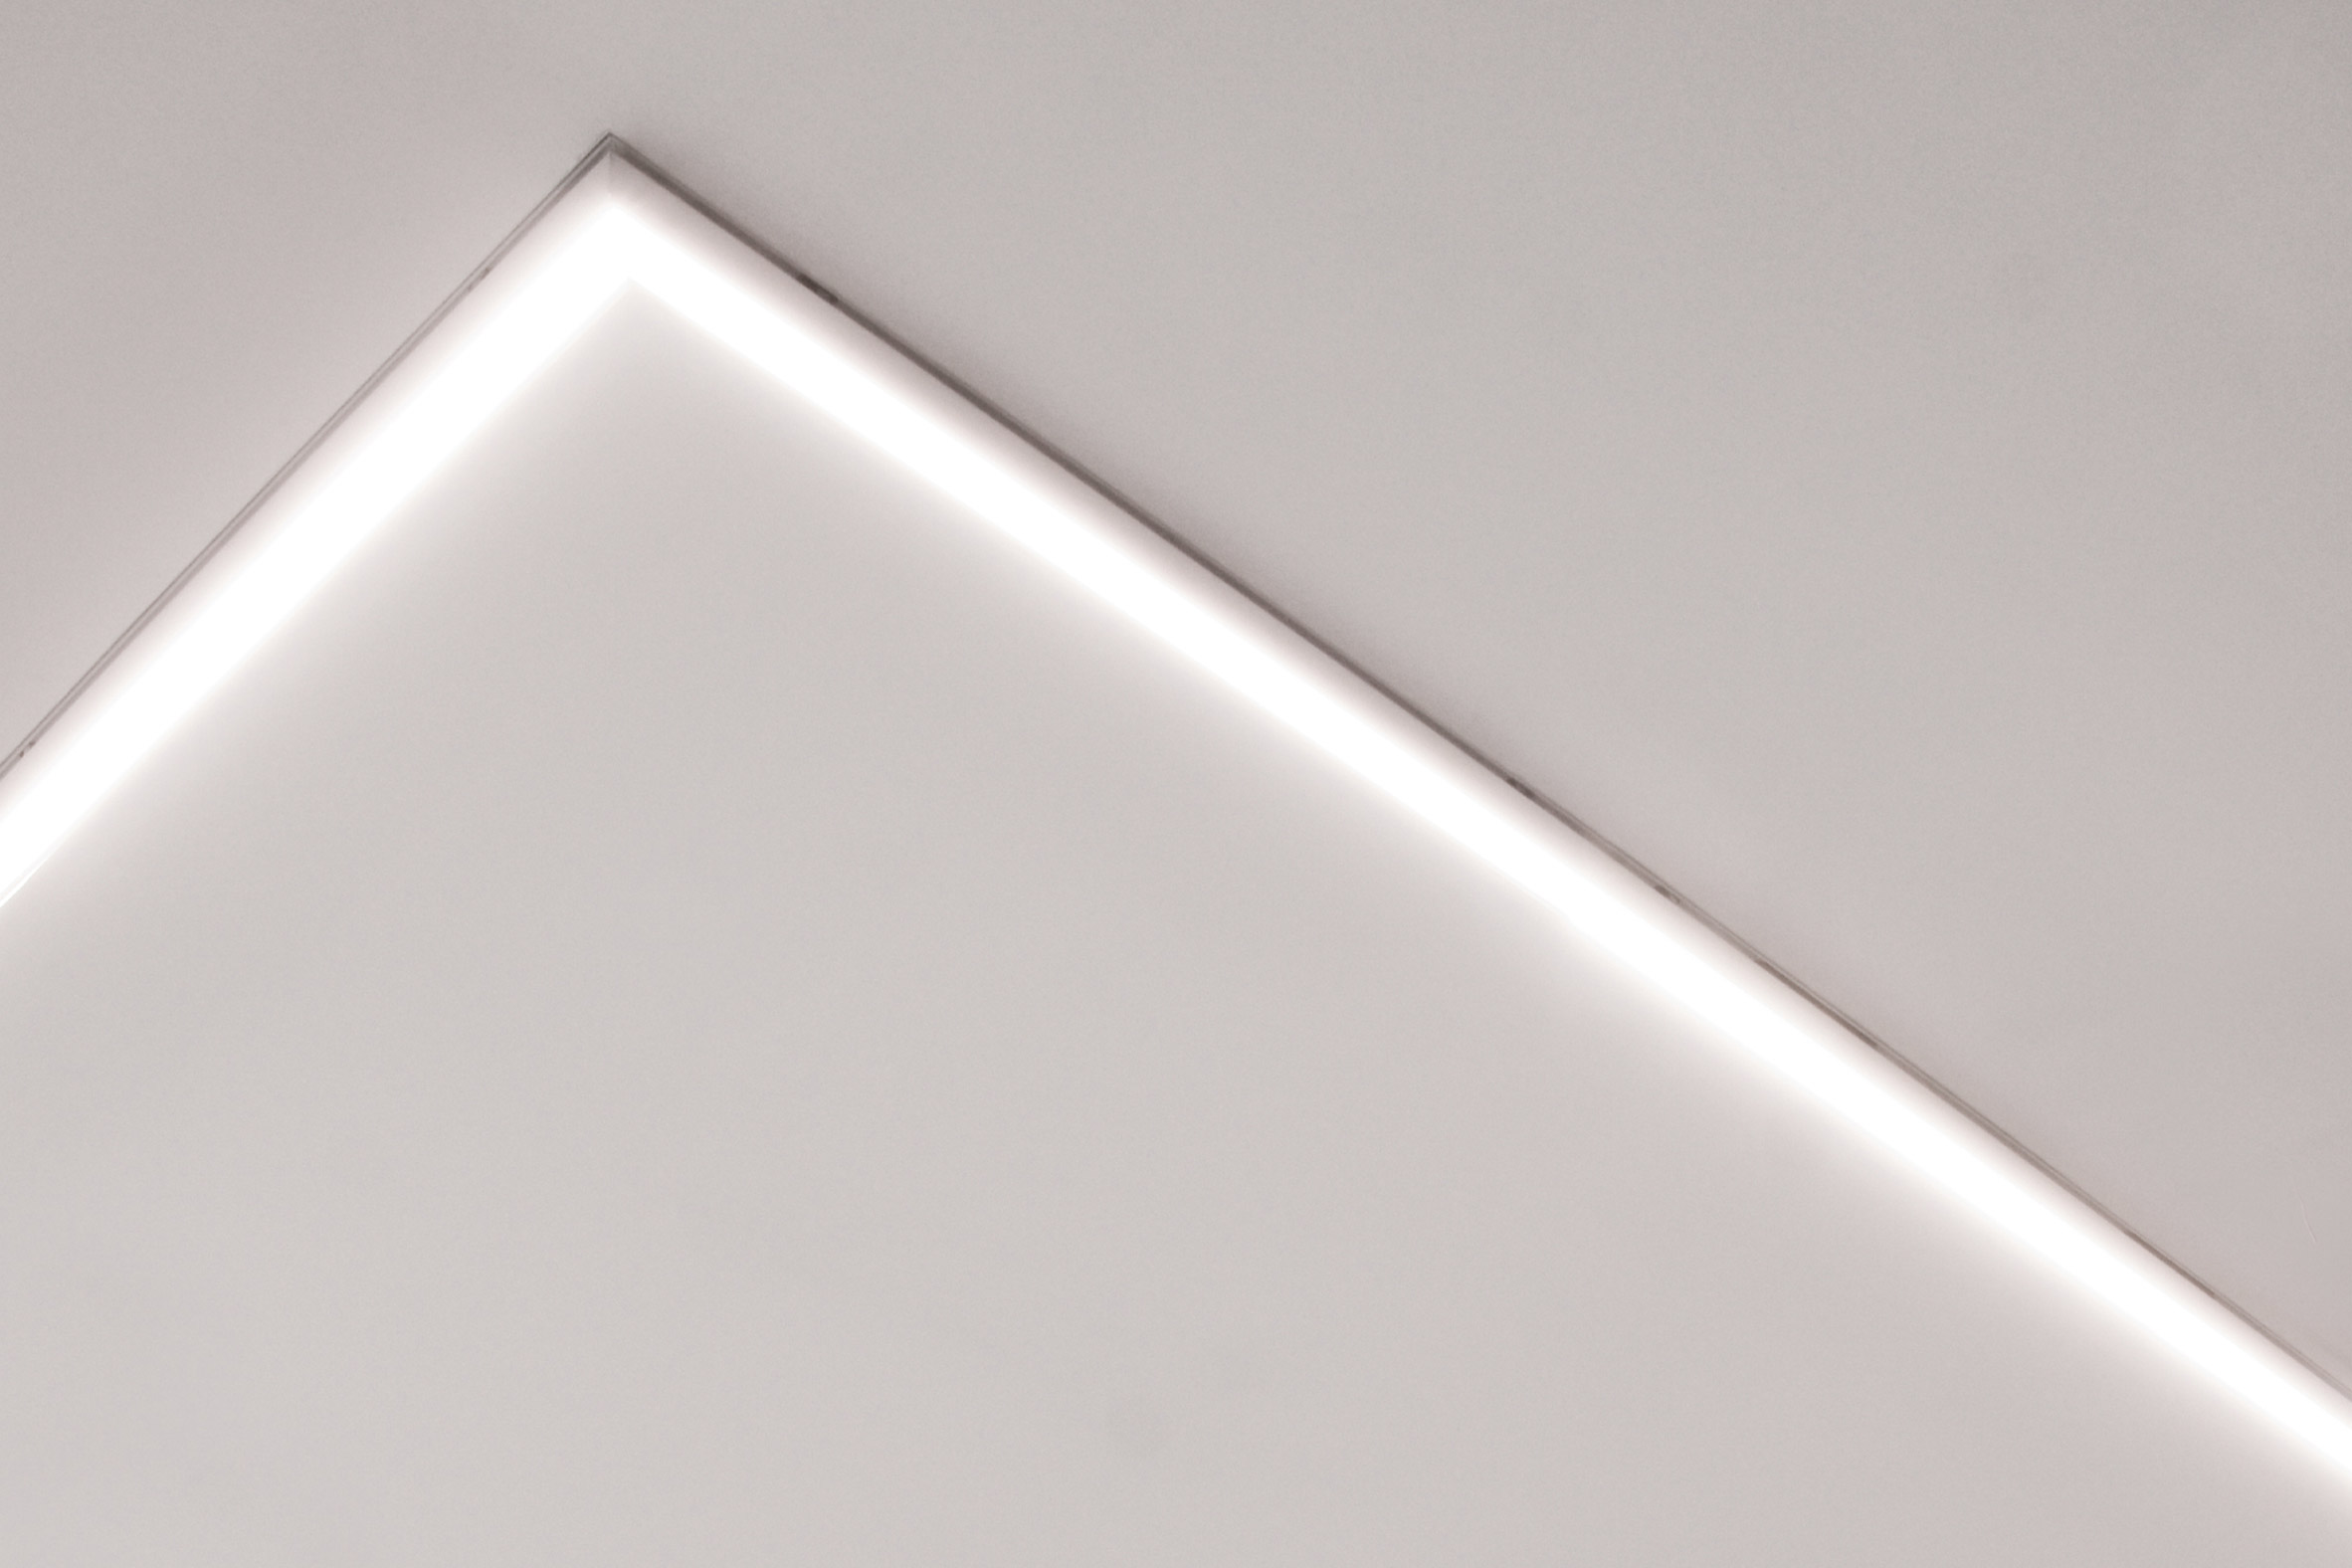 Rail by K-array is LED lighting strip with built-in speakers